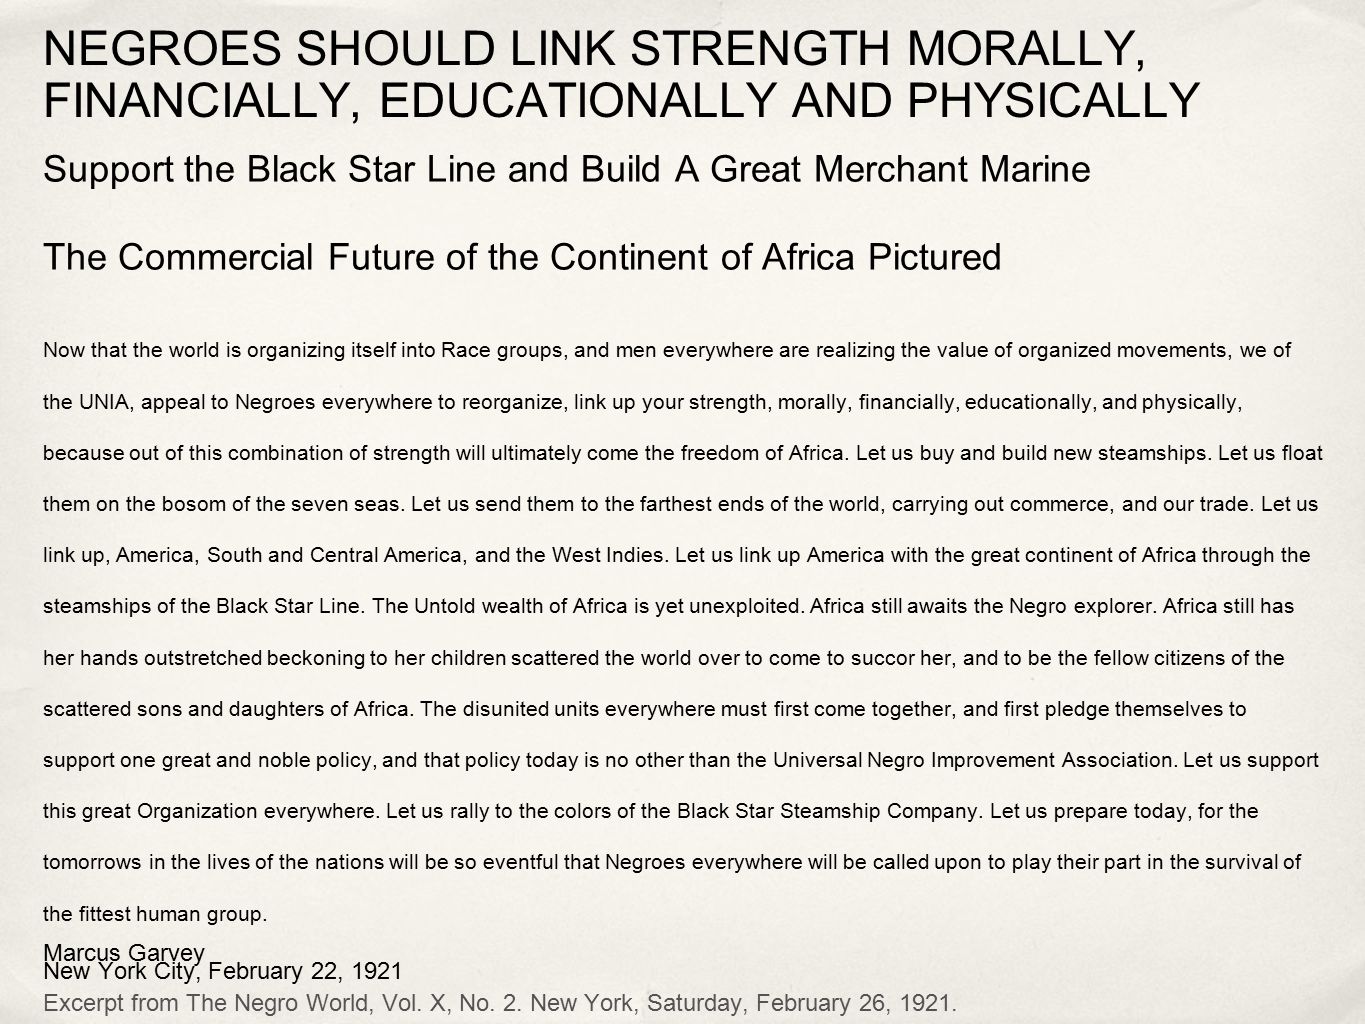 NEGROES SHOULD LINK STRENGTH MORALLY, FINANCIALLY, EDUCATIONALLY AND PHYSICALLY